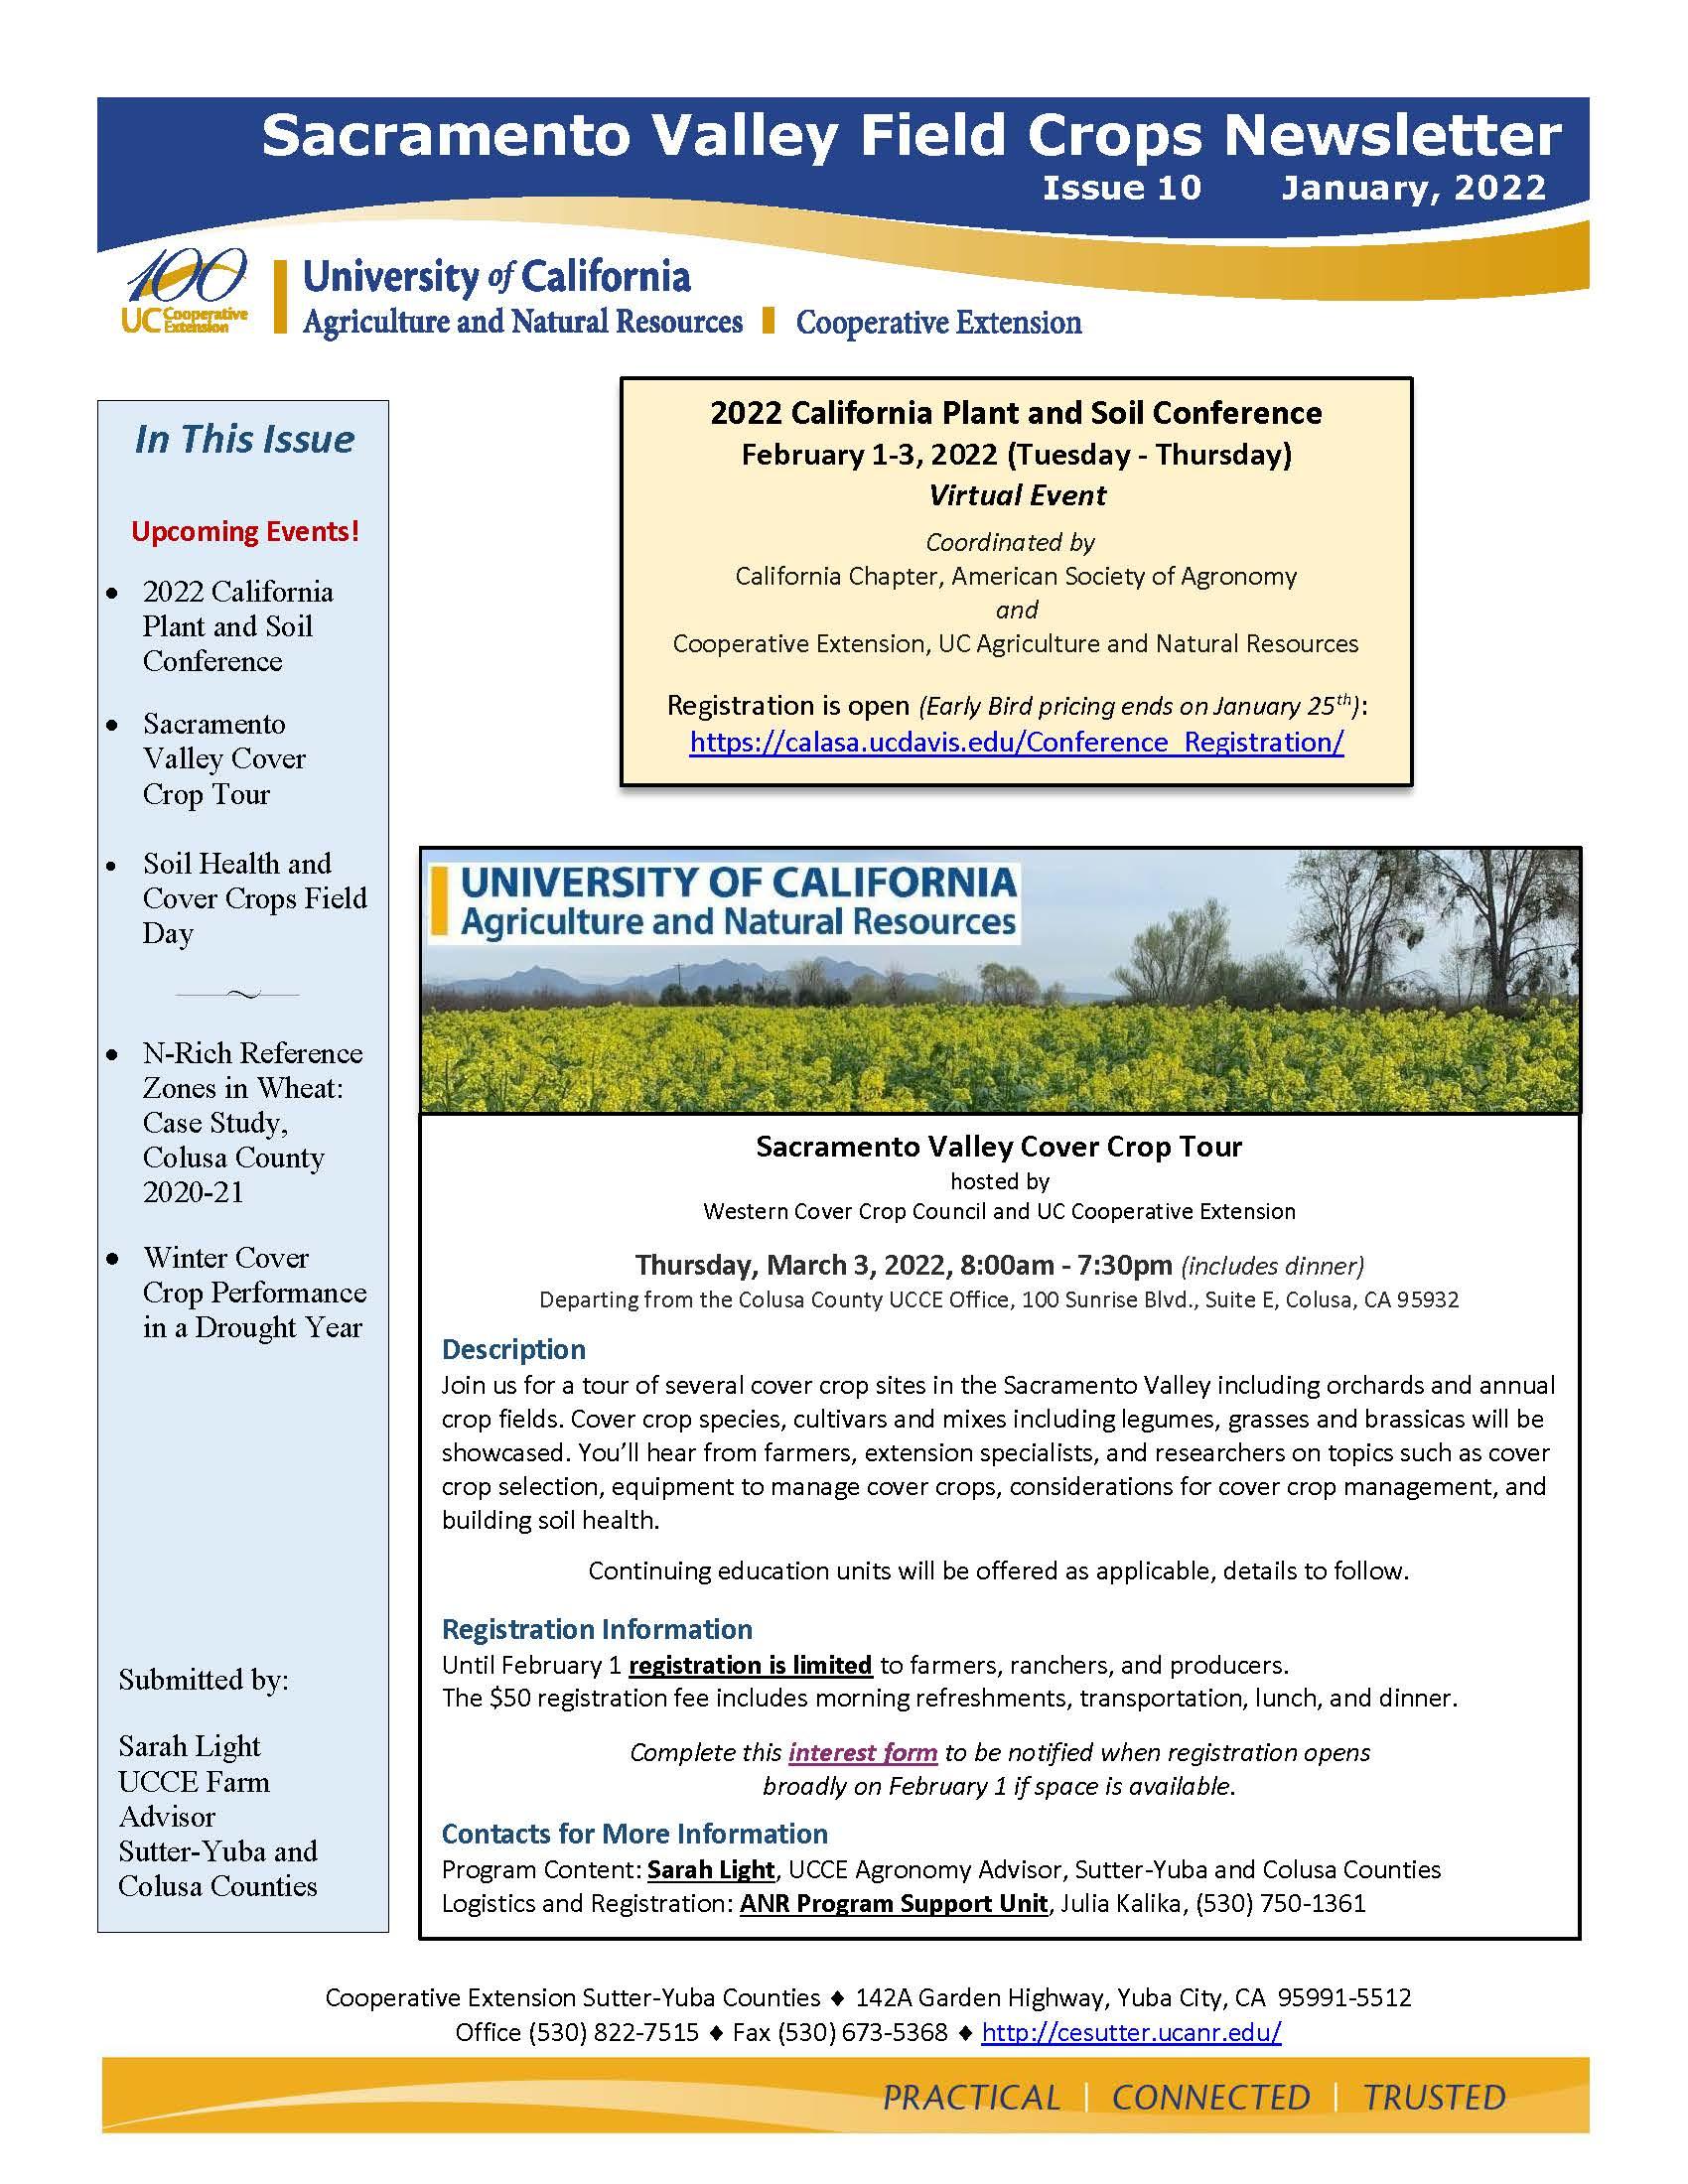 Sacramento Valley Field Crops Newsletter - January 2022_Page_01